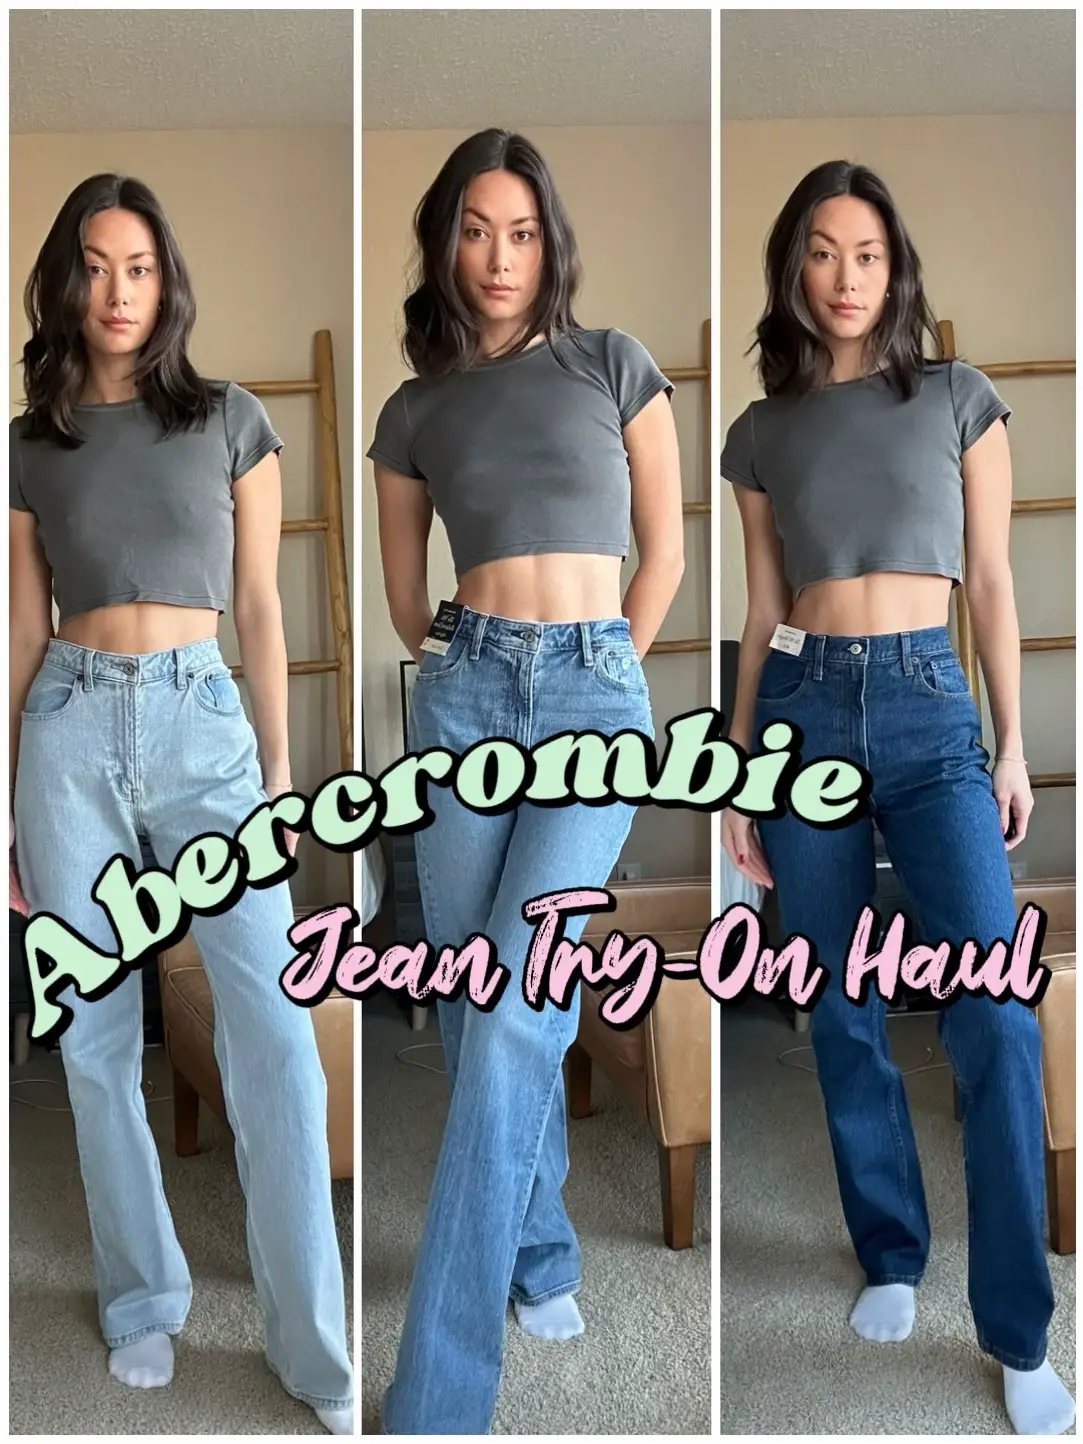 𝐶𝐴𝑇𝐸𝐺𝑂𝑅𝑌 is: 𝐁𝐨𝐨𝐭𝐲 𝐏𝐨𝐩 𝐏𝐚𝐧𝐭𝐬 ✨ So many colors to  choose from 😍 and remember ALL JEANS $2000 (Fashion Night Out Sale) Get  𝐓𝐡𝐢𝐬 𝐋𝐨𝐨𝐤 in store TODAY.